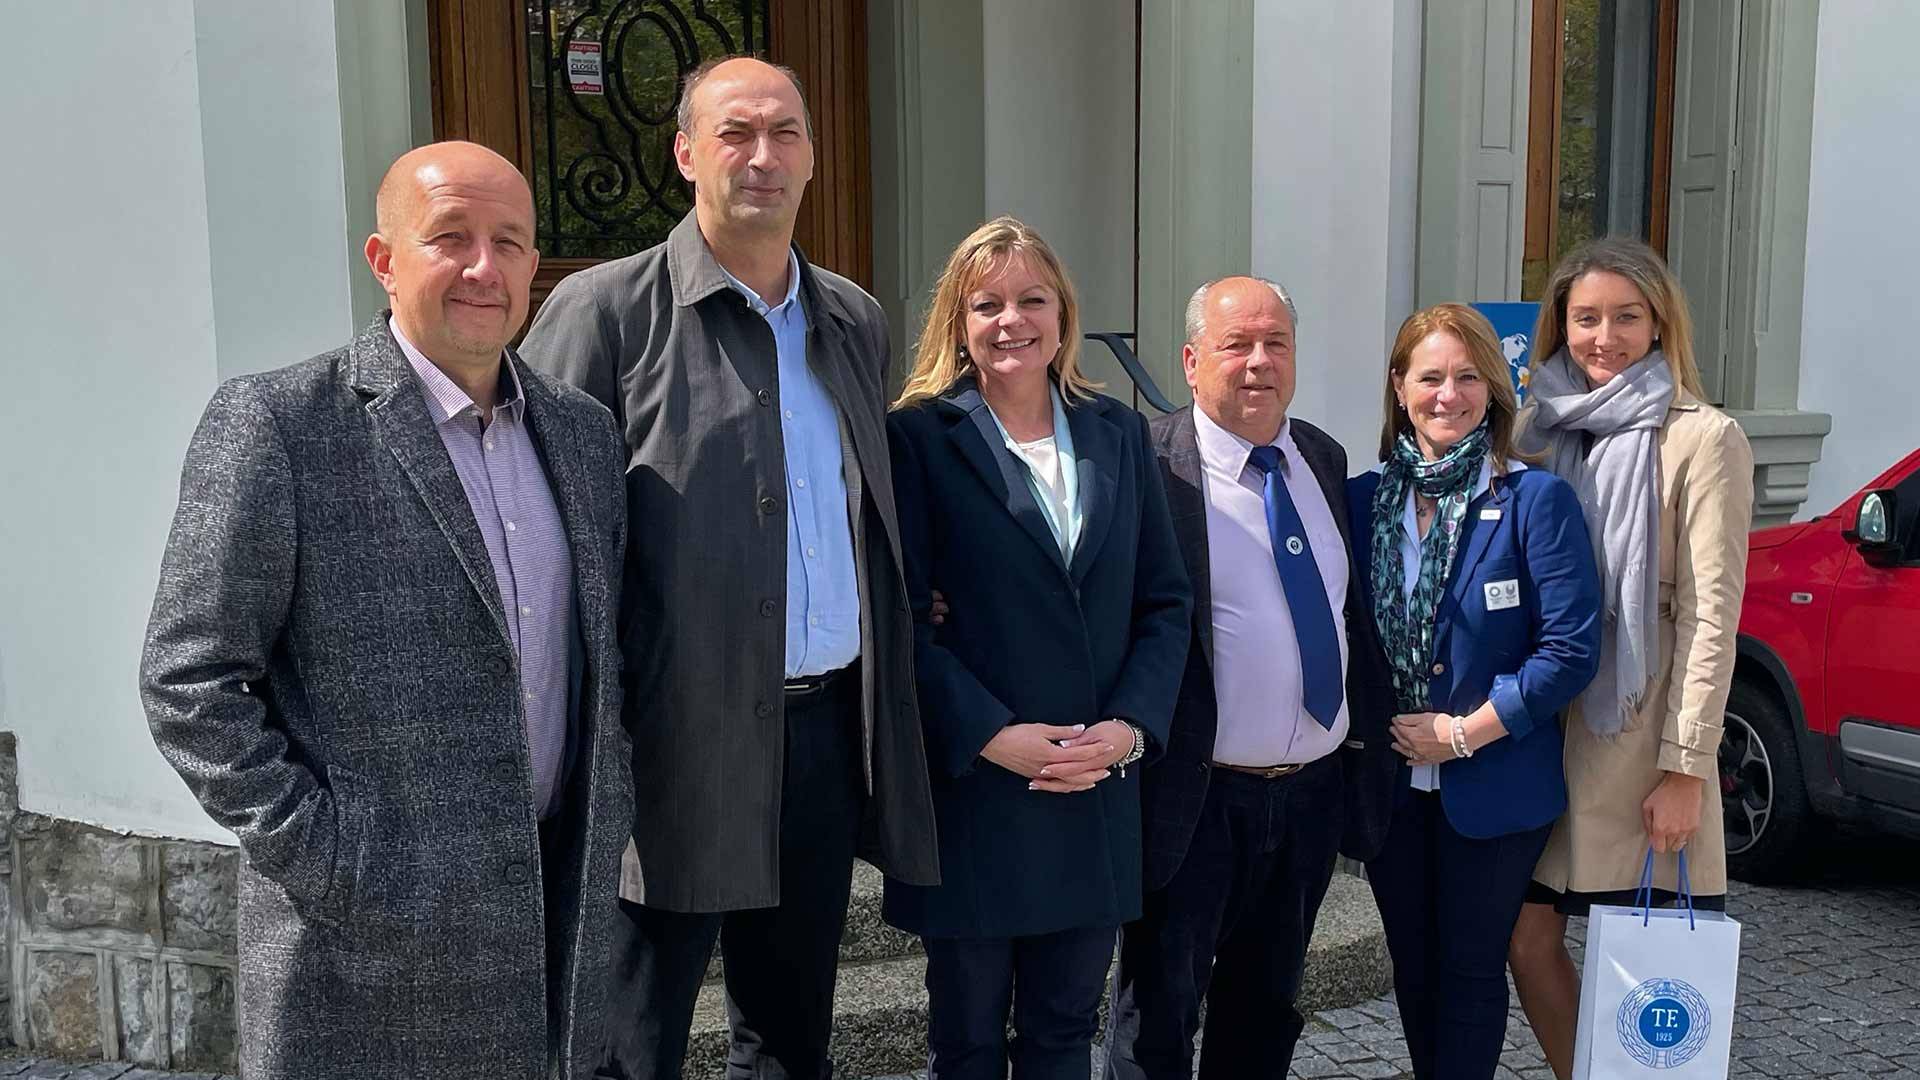 One day and eleven sports federations: HUSS rector visits Lausanne